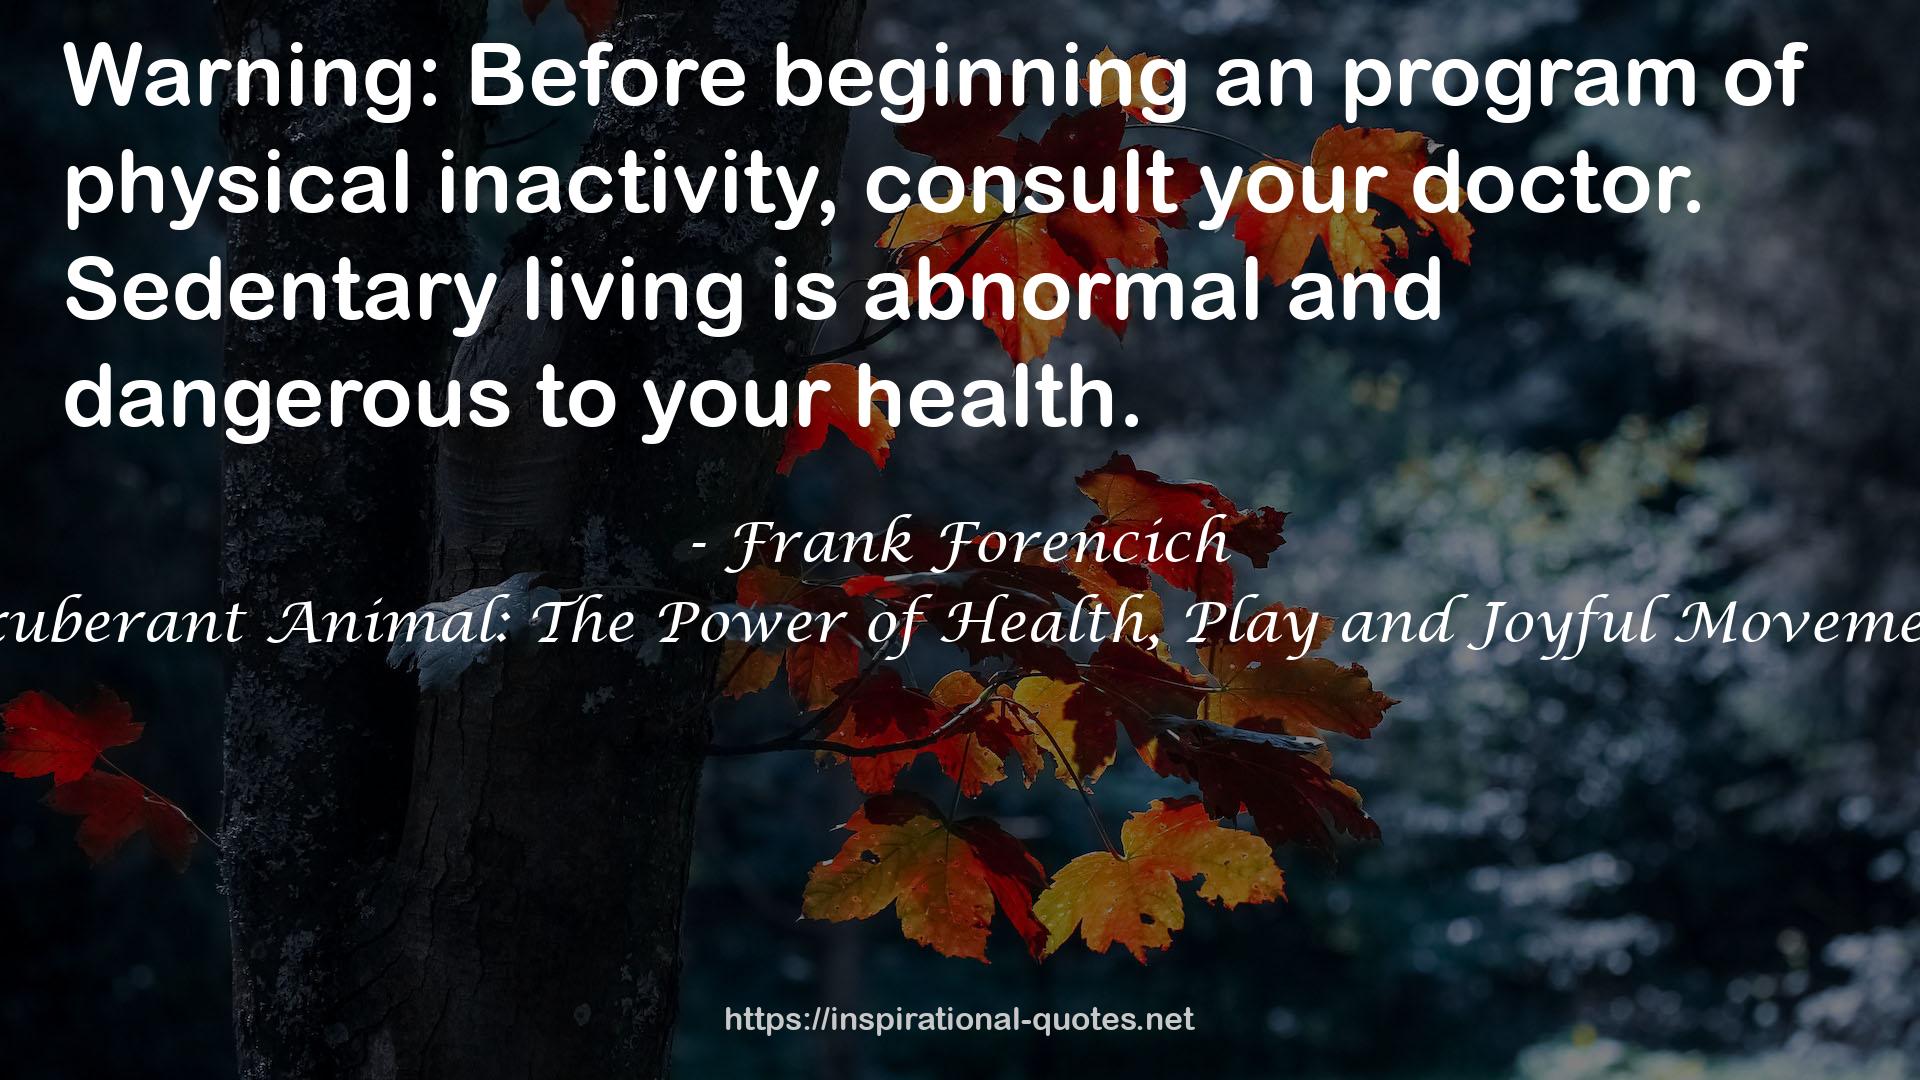 Exuberant Animal: The Power of Health, Play and Joyful Movement QUOTES